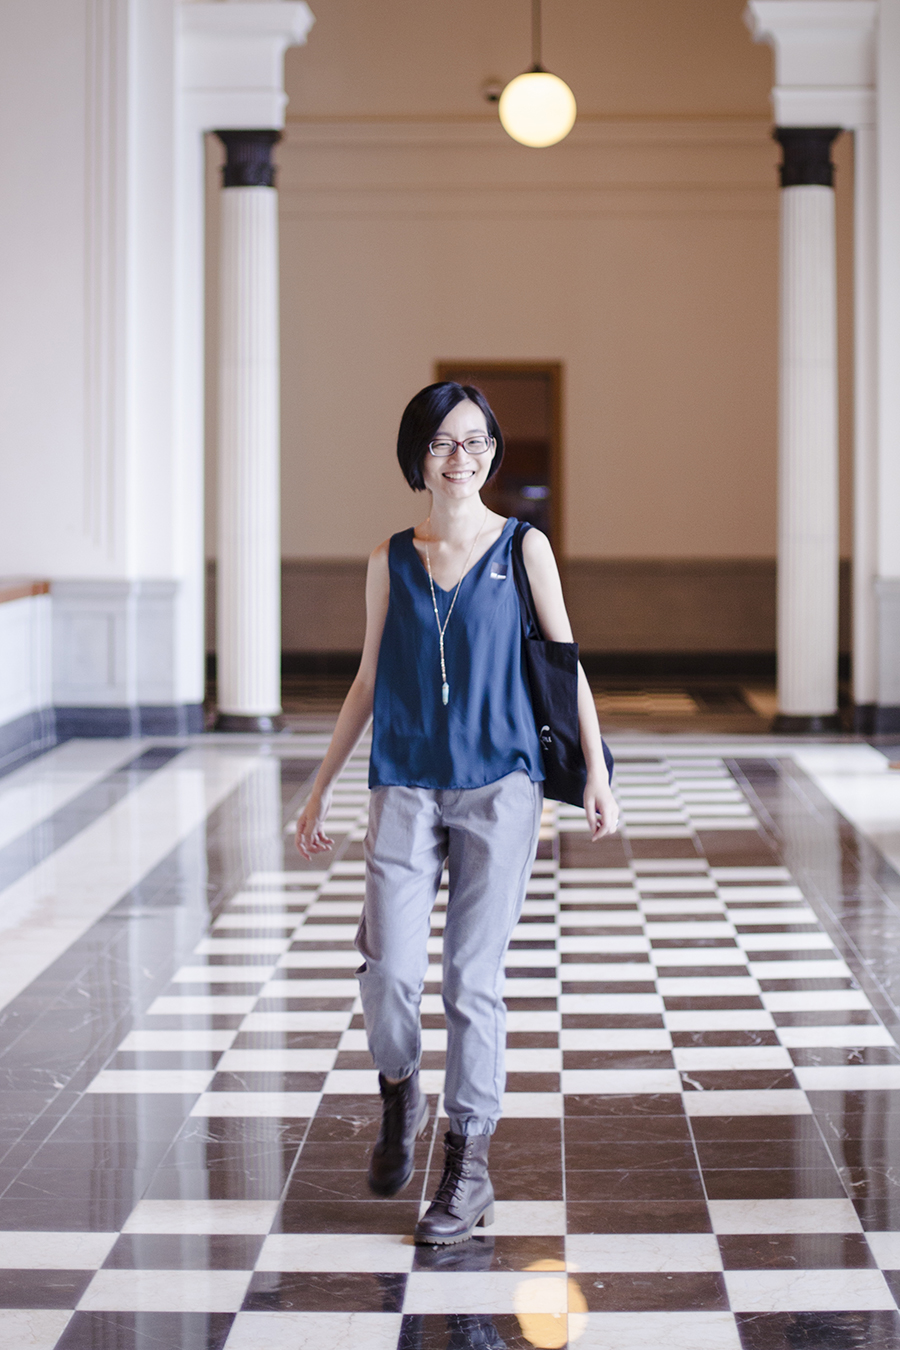 National Gallery Singapore: walking on checkered floor.